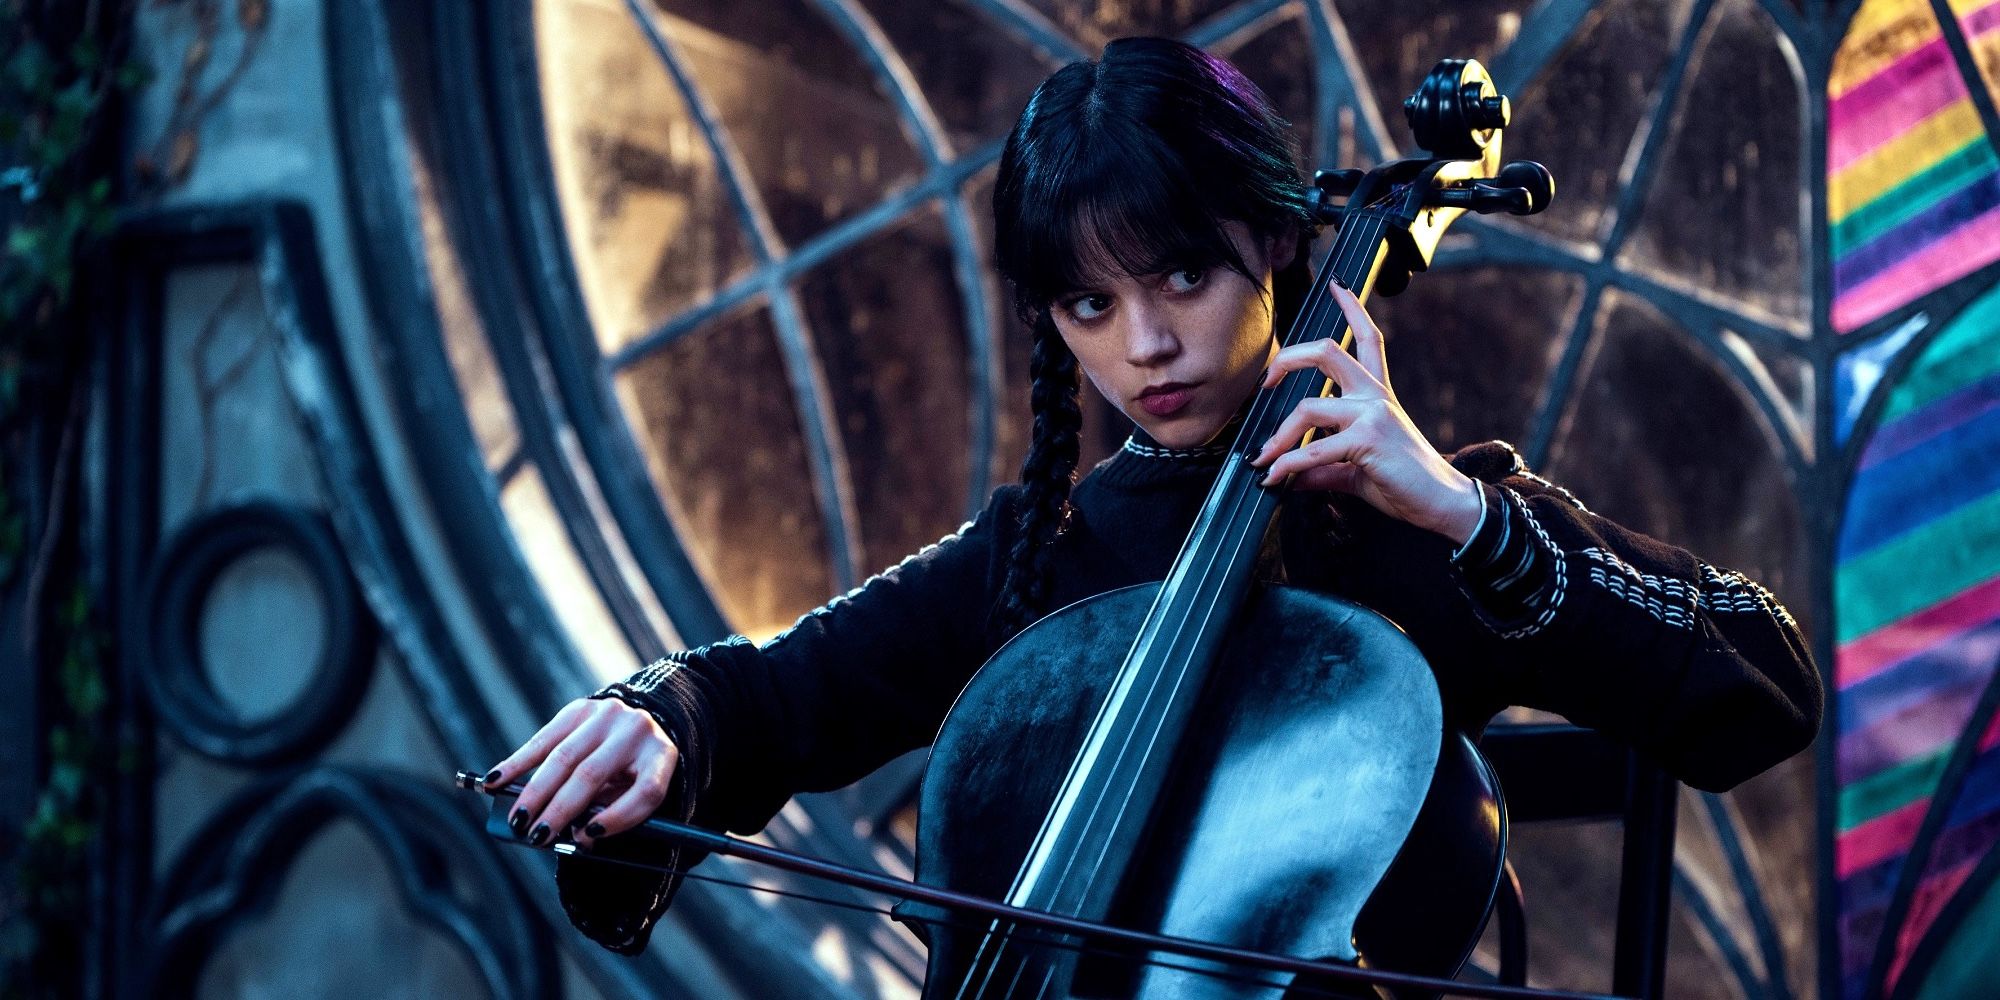 Wednesday Addams plays cello in Wednesday season 1